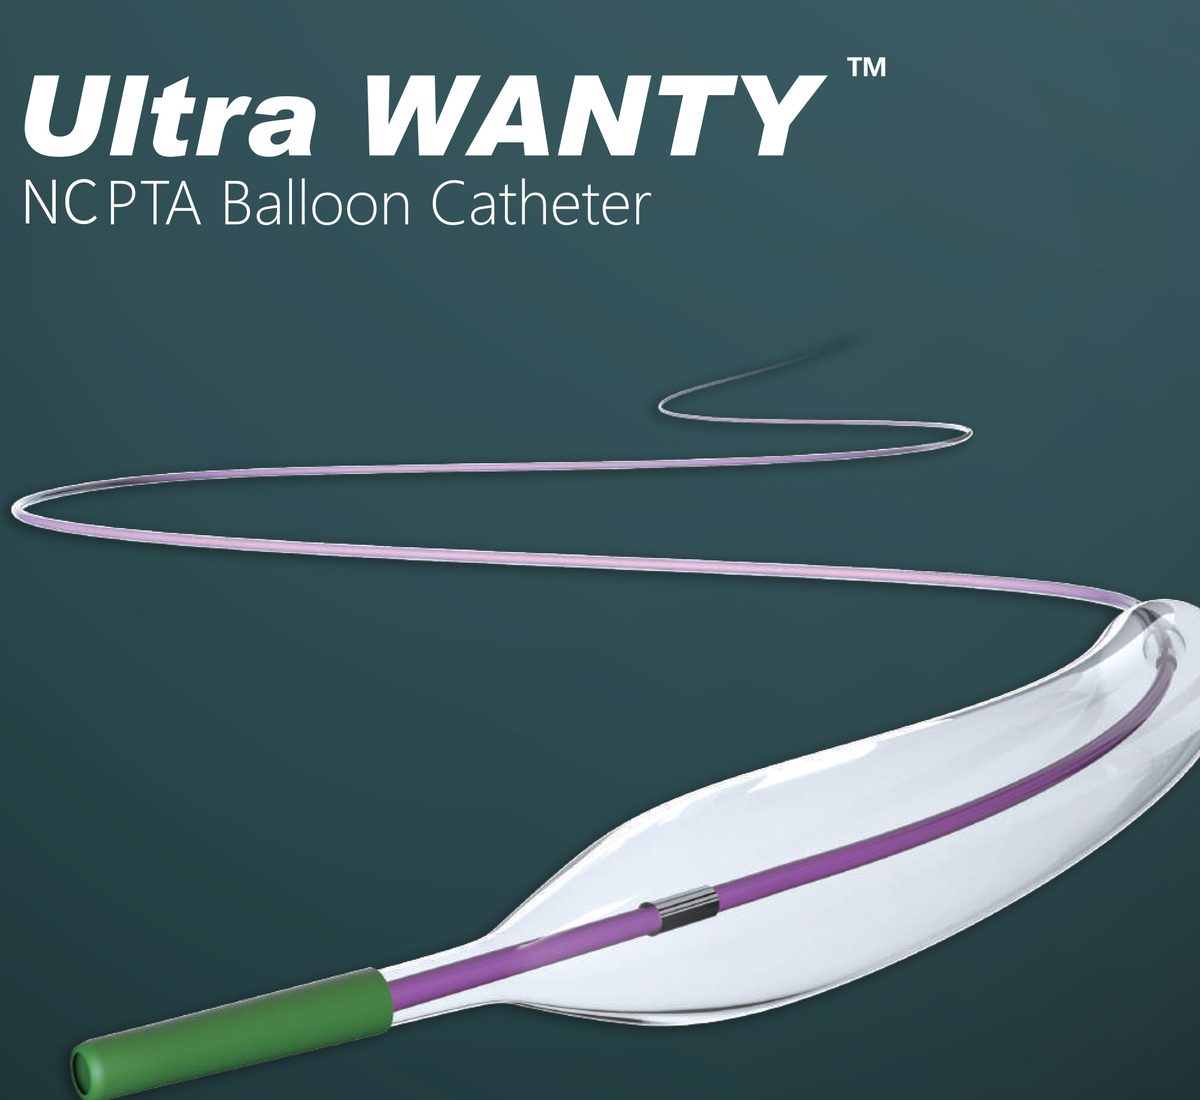 <p><span style="font-weight: bold;">ULTRA WANTY NC PTA Balloon Catheter</span><br></p>